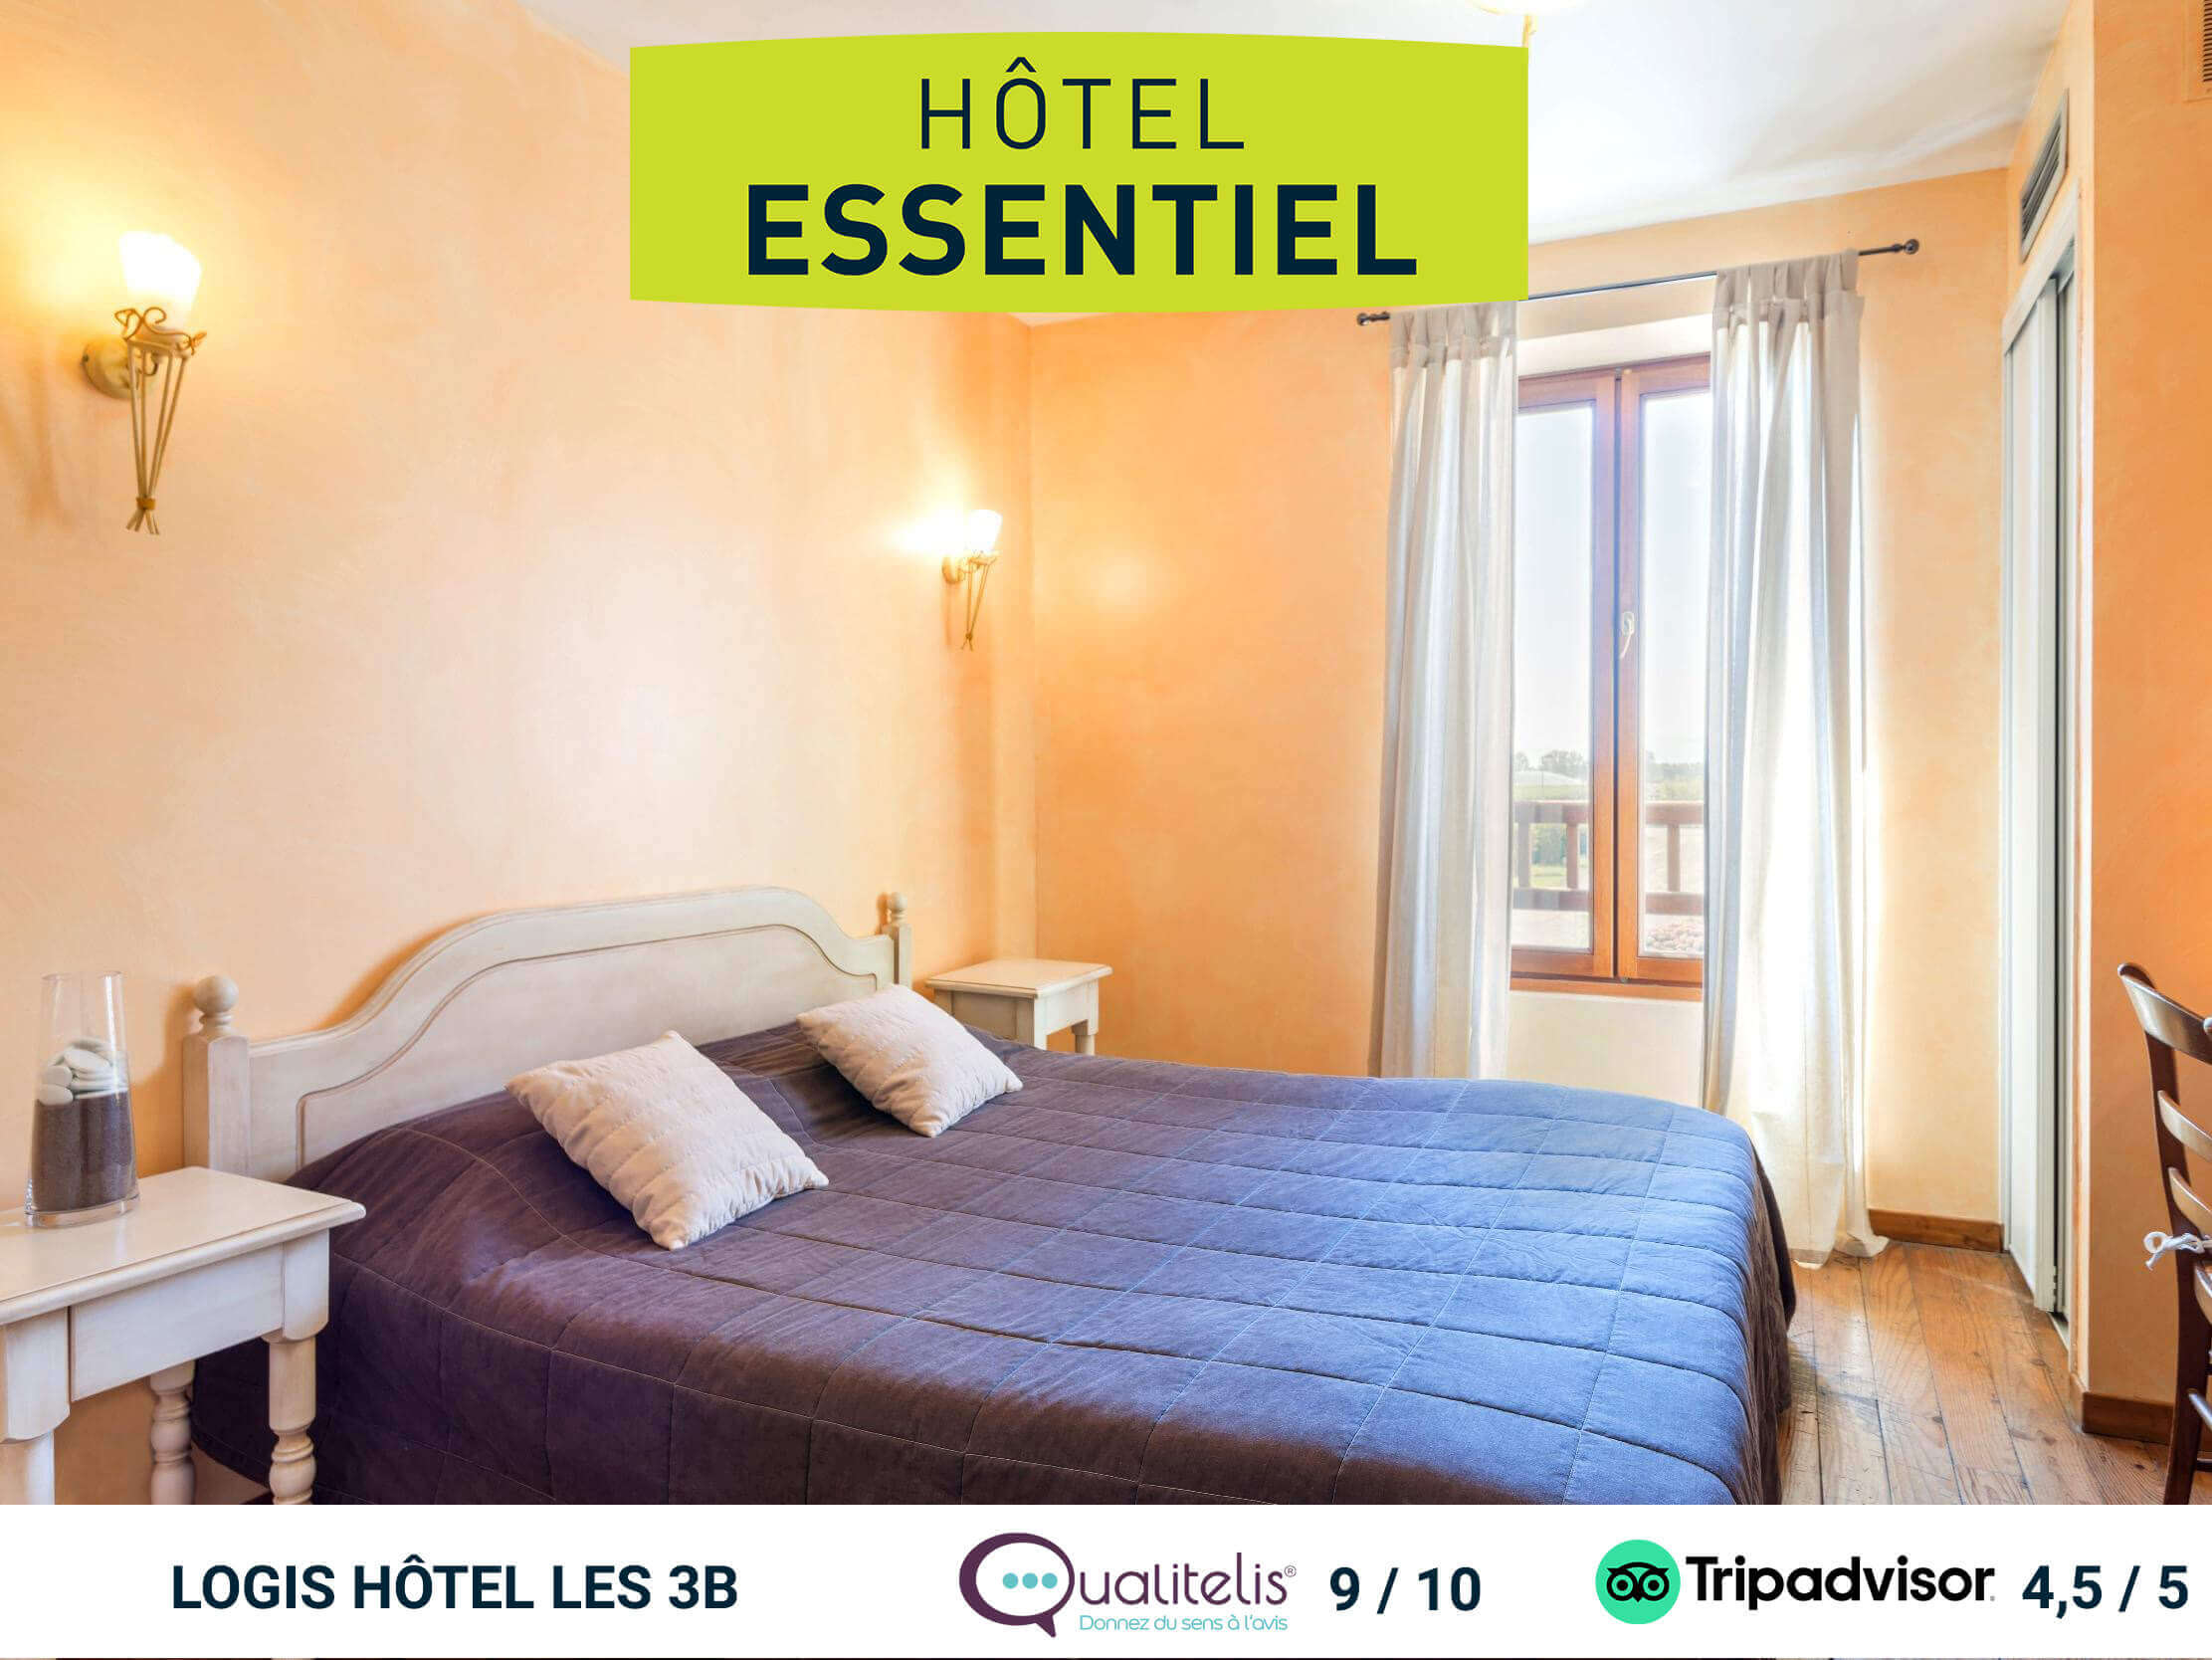 Hôtel Essentiel: LOGIS COMFORT AND QUALITY AT THE BEST PRICE.